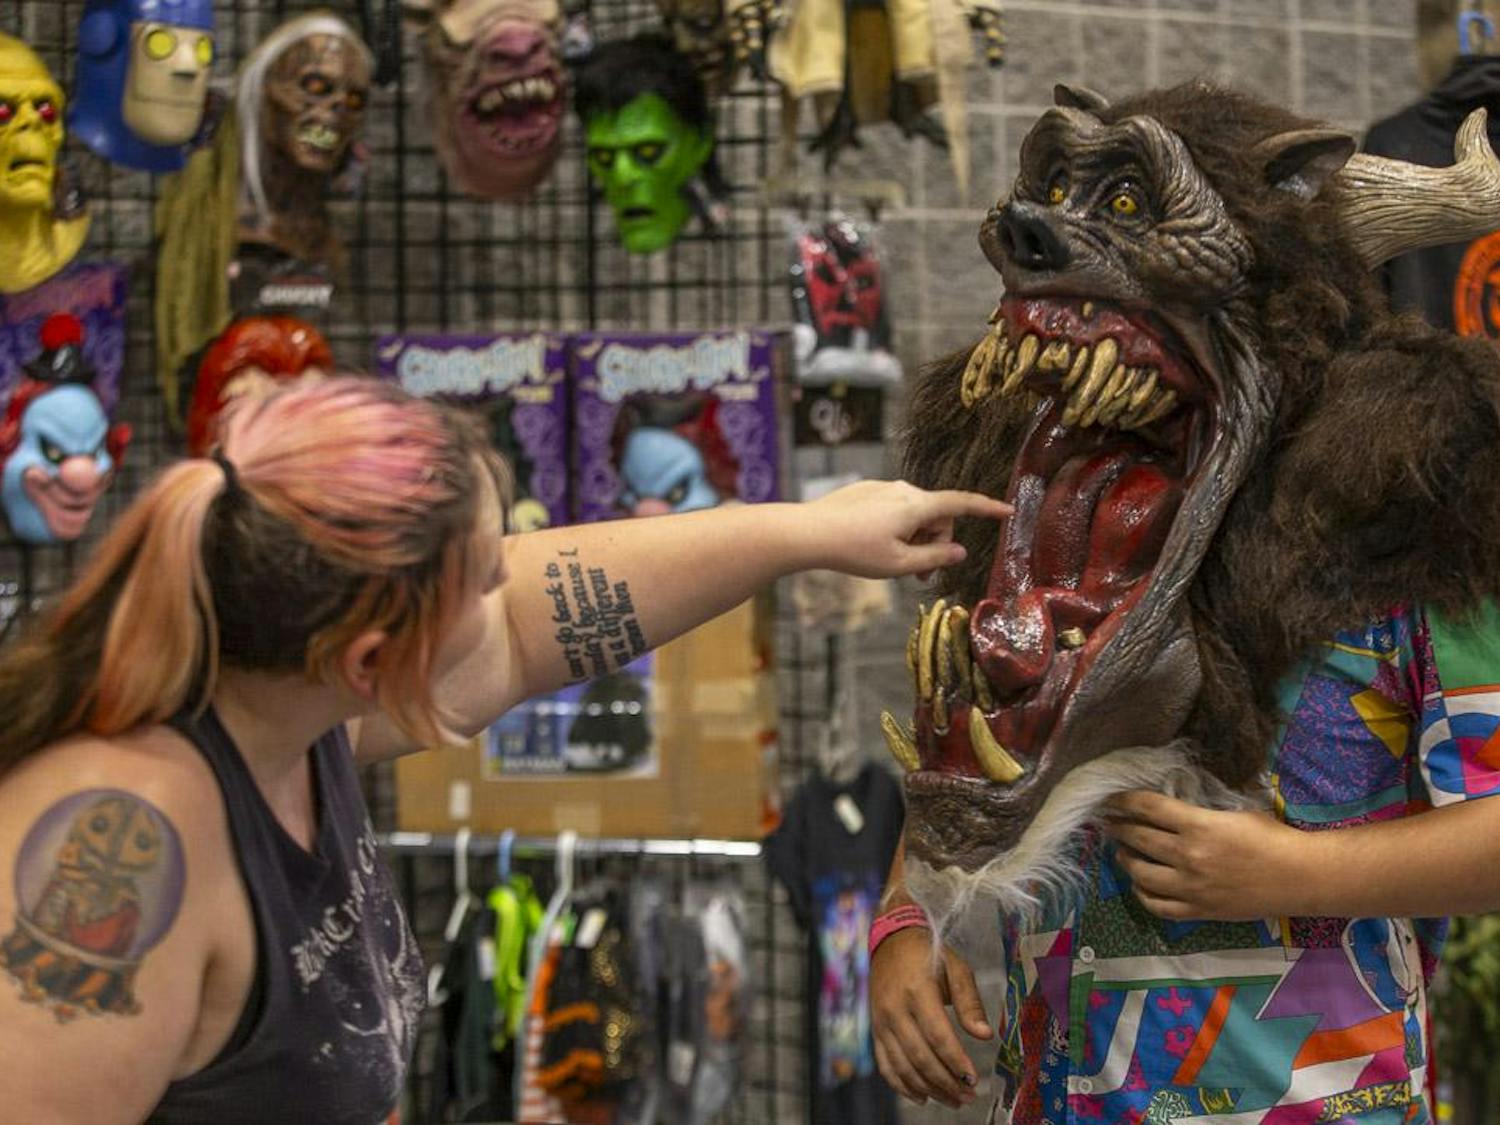 Cassie Wing (left), the owner of Wretched Collections, sticks her finger inside a monster mask worn by Stone McLinde (right) during the South Carolina Horror Convention at the Columbia Metropolitan Convention Center on Sept. 16, 2023. Wretched Collections, based out of Lexington, South Carolina, has a collection of more than 8,500 costumes, alternative fashion and other types of clothing and apparel.